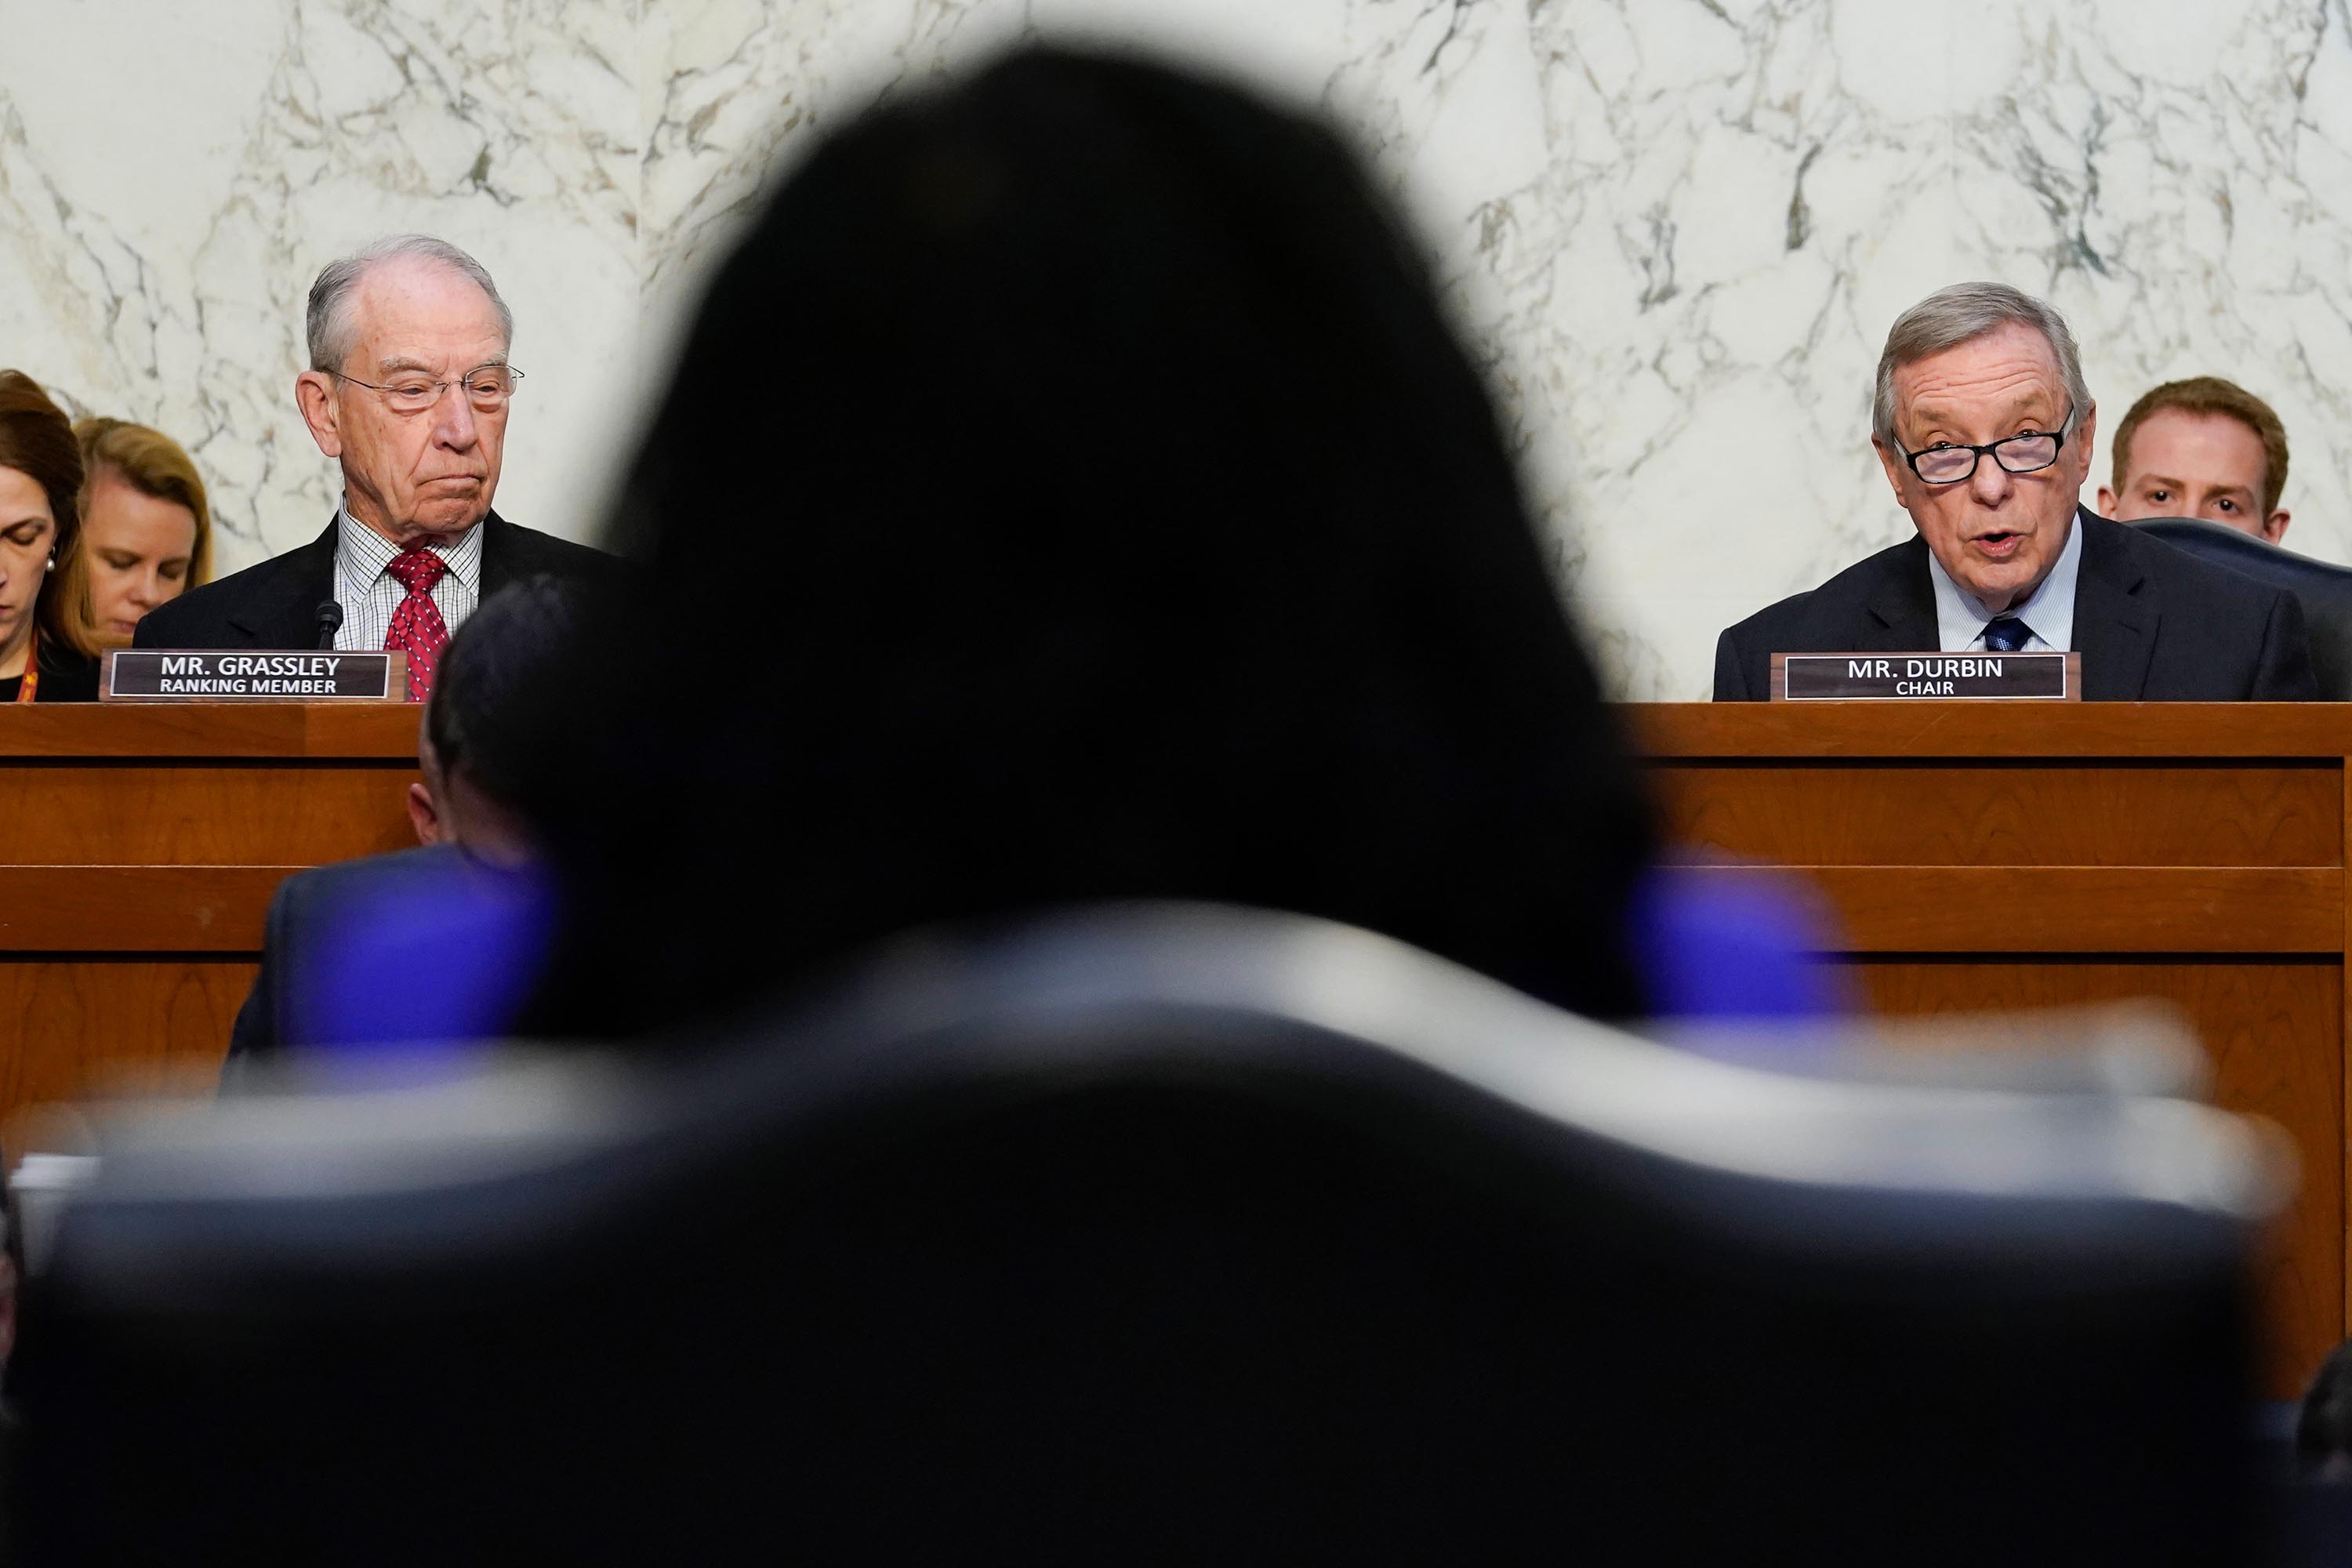 Sen. Dick Durbin, chairman of the Senate Judiciary Committee, right, speaks as Supreme Court nominee Ketanji Brown Jackson listens during a Senate Judiciary Committee confirmation hearing on Capitol Hill in Washington, Monday, March 21, 2022.